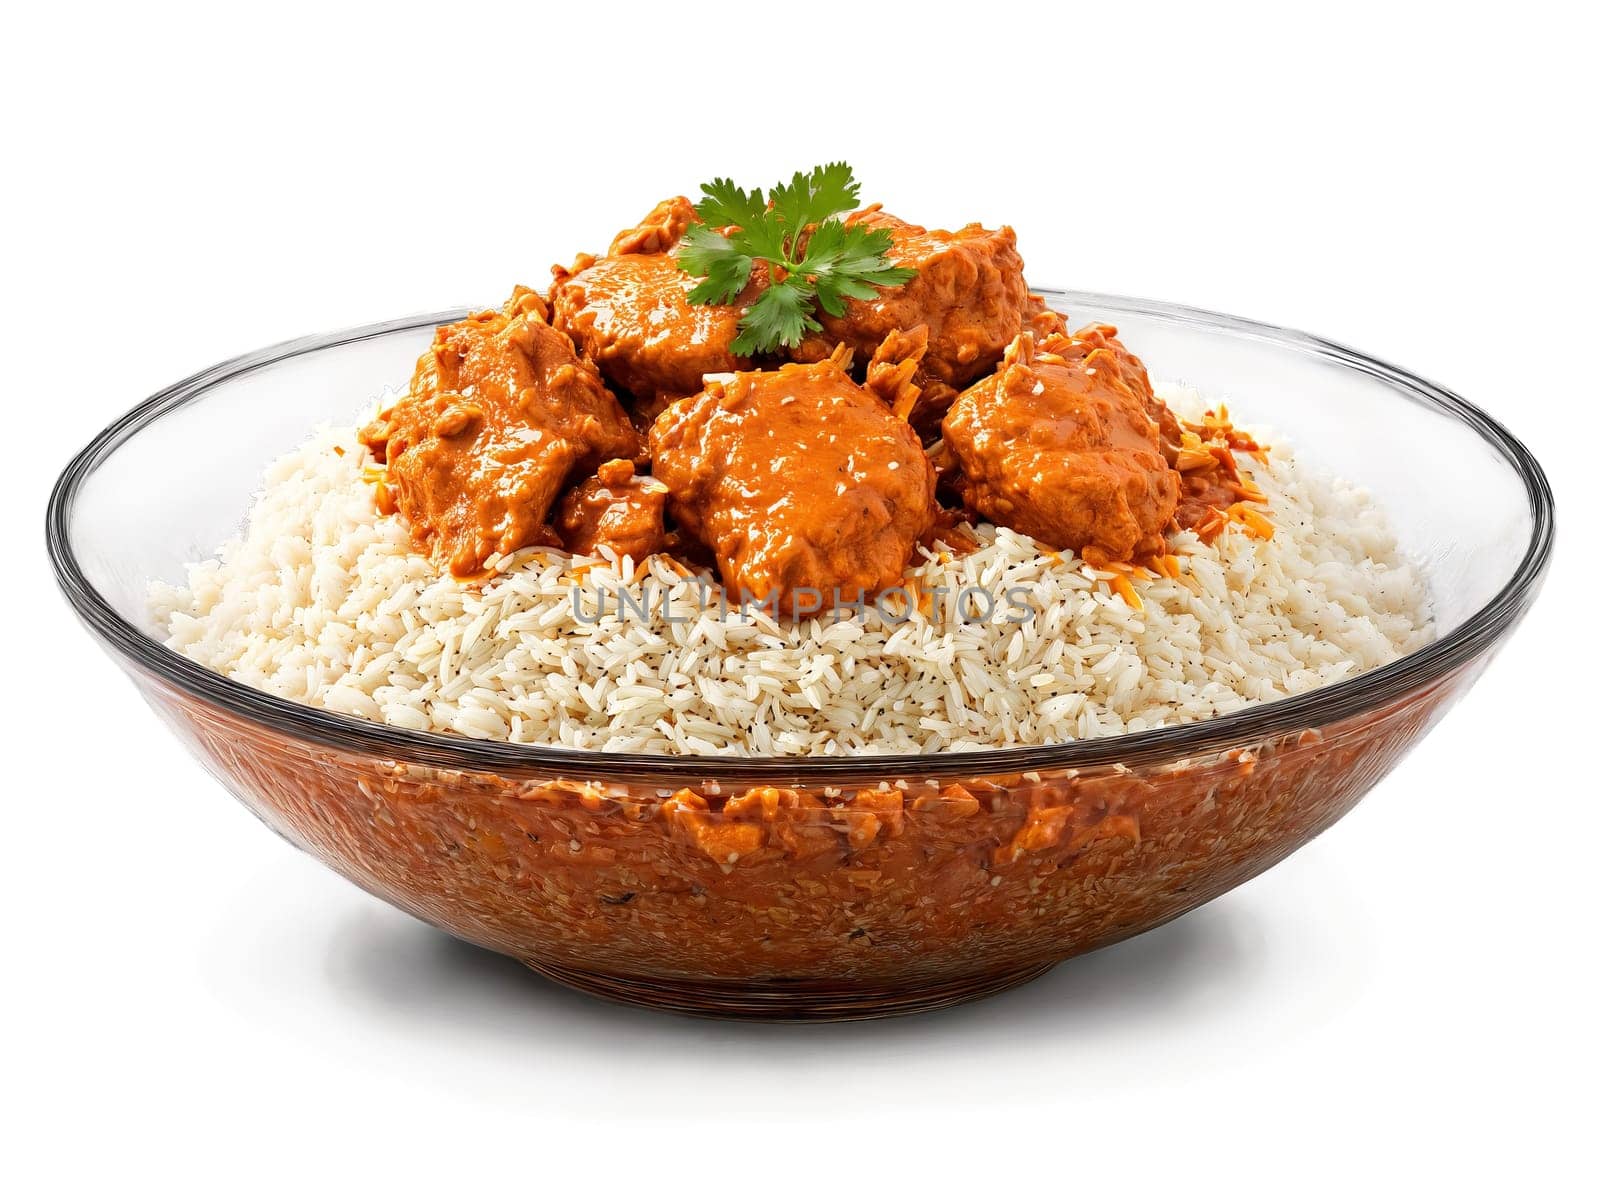 Butter chicken creamy and spiced with basmati rice on a transparent glass bowl warm tones. Food isolated on transparent background.